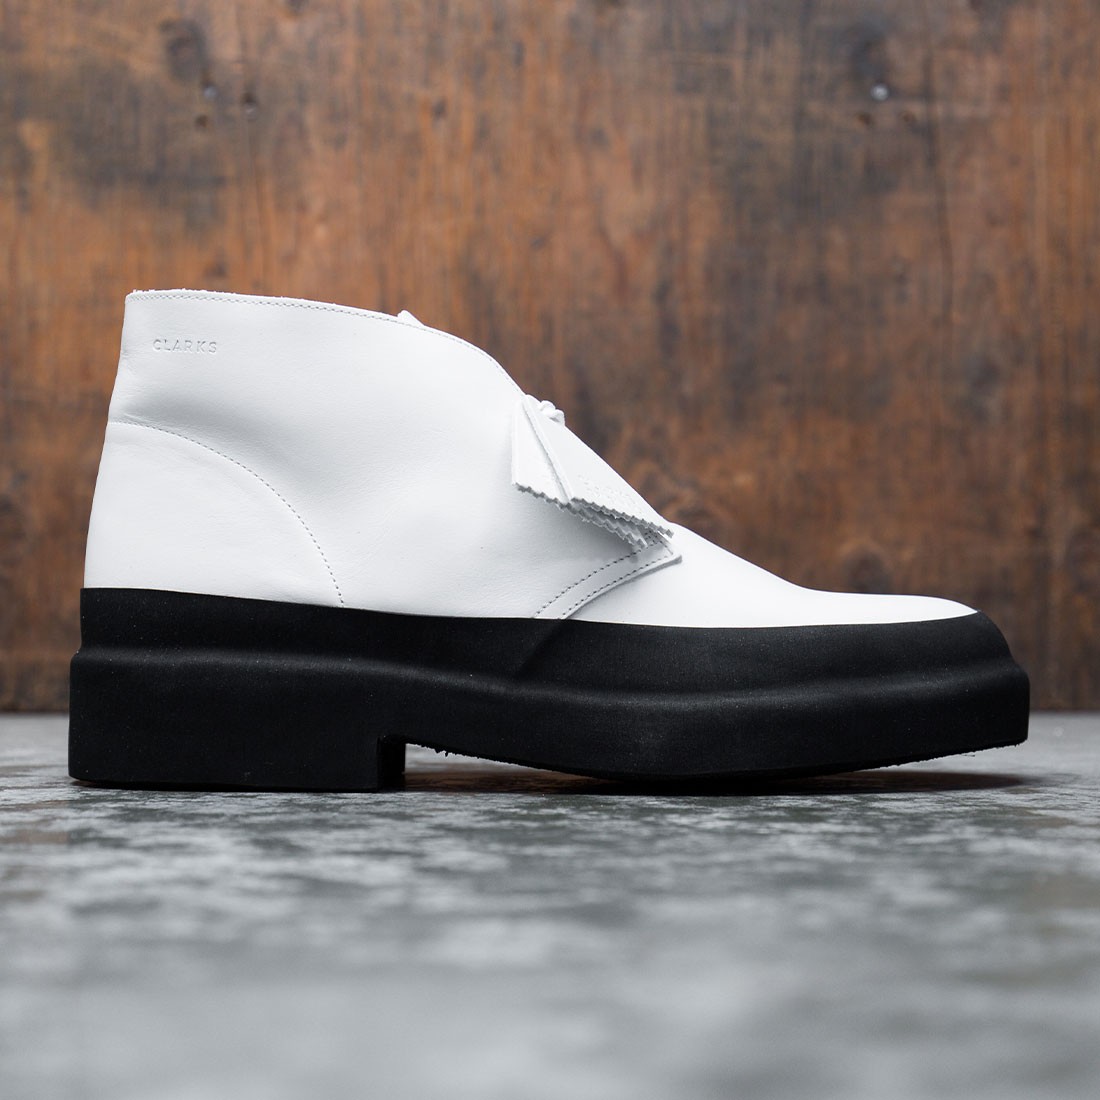 white clarks boots